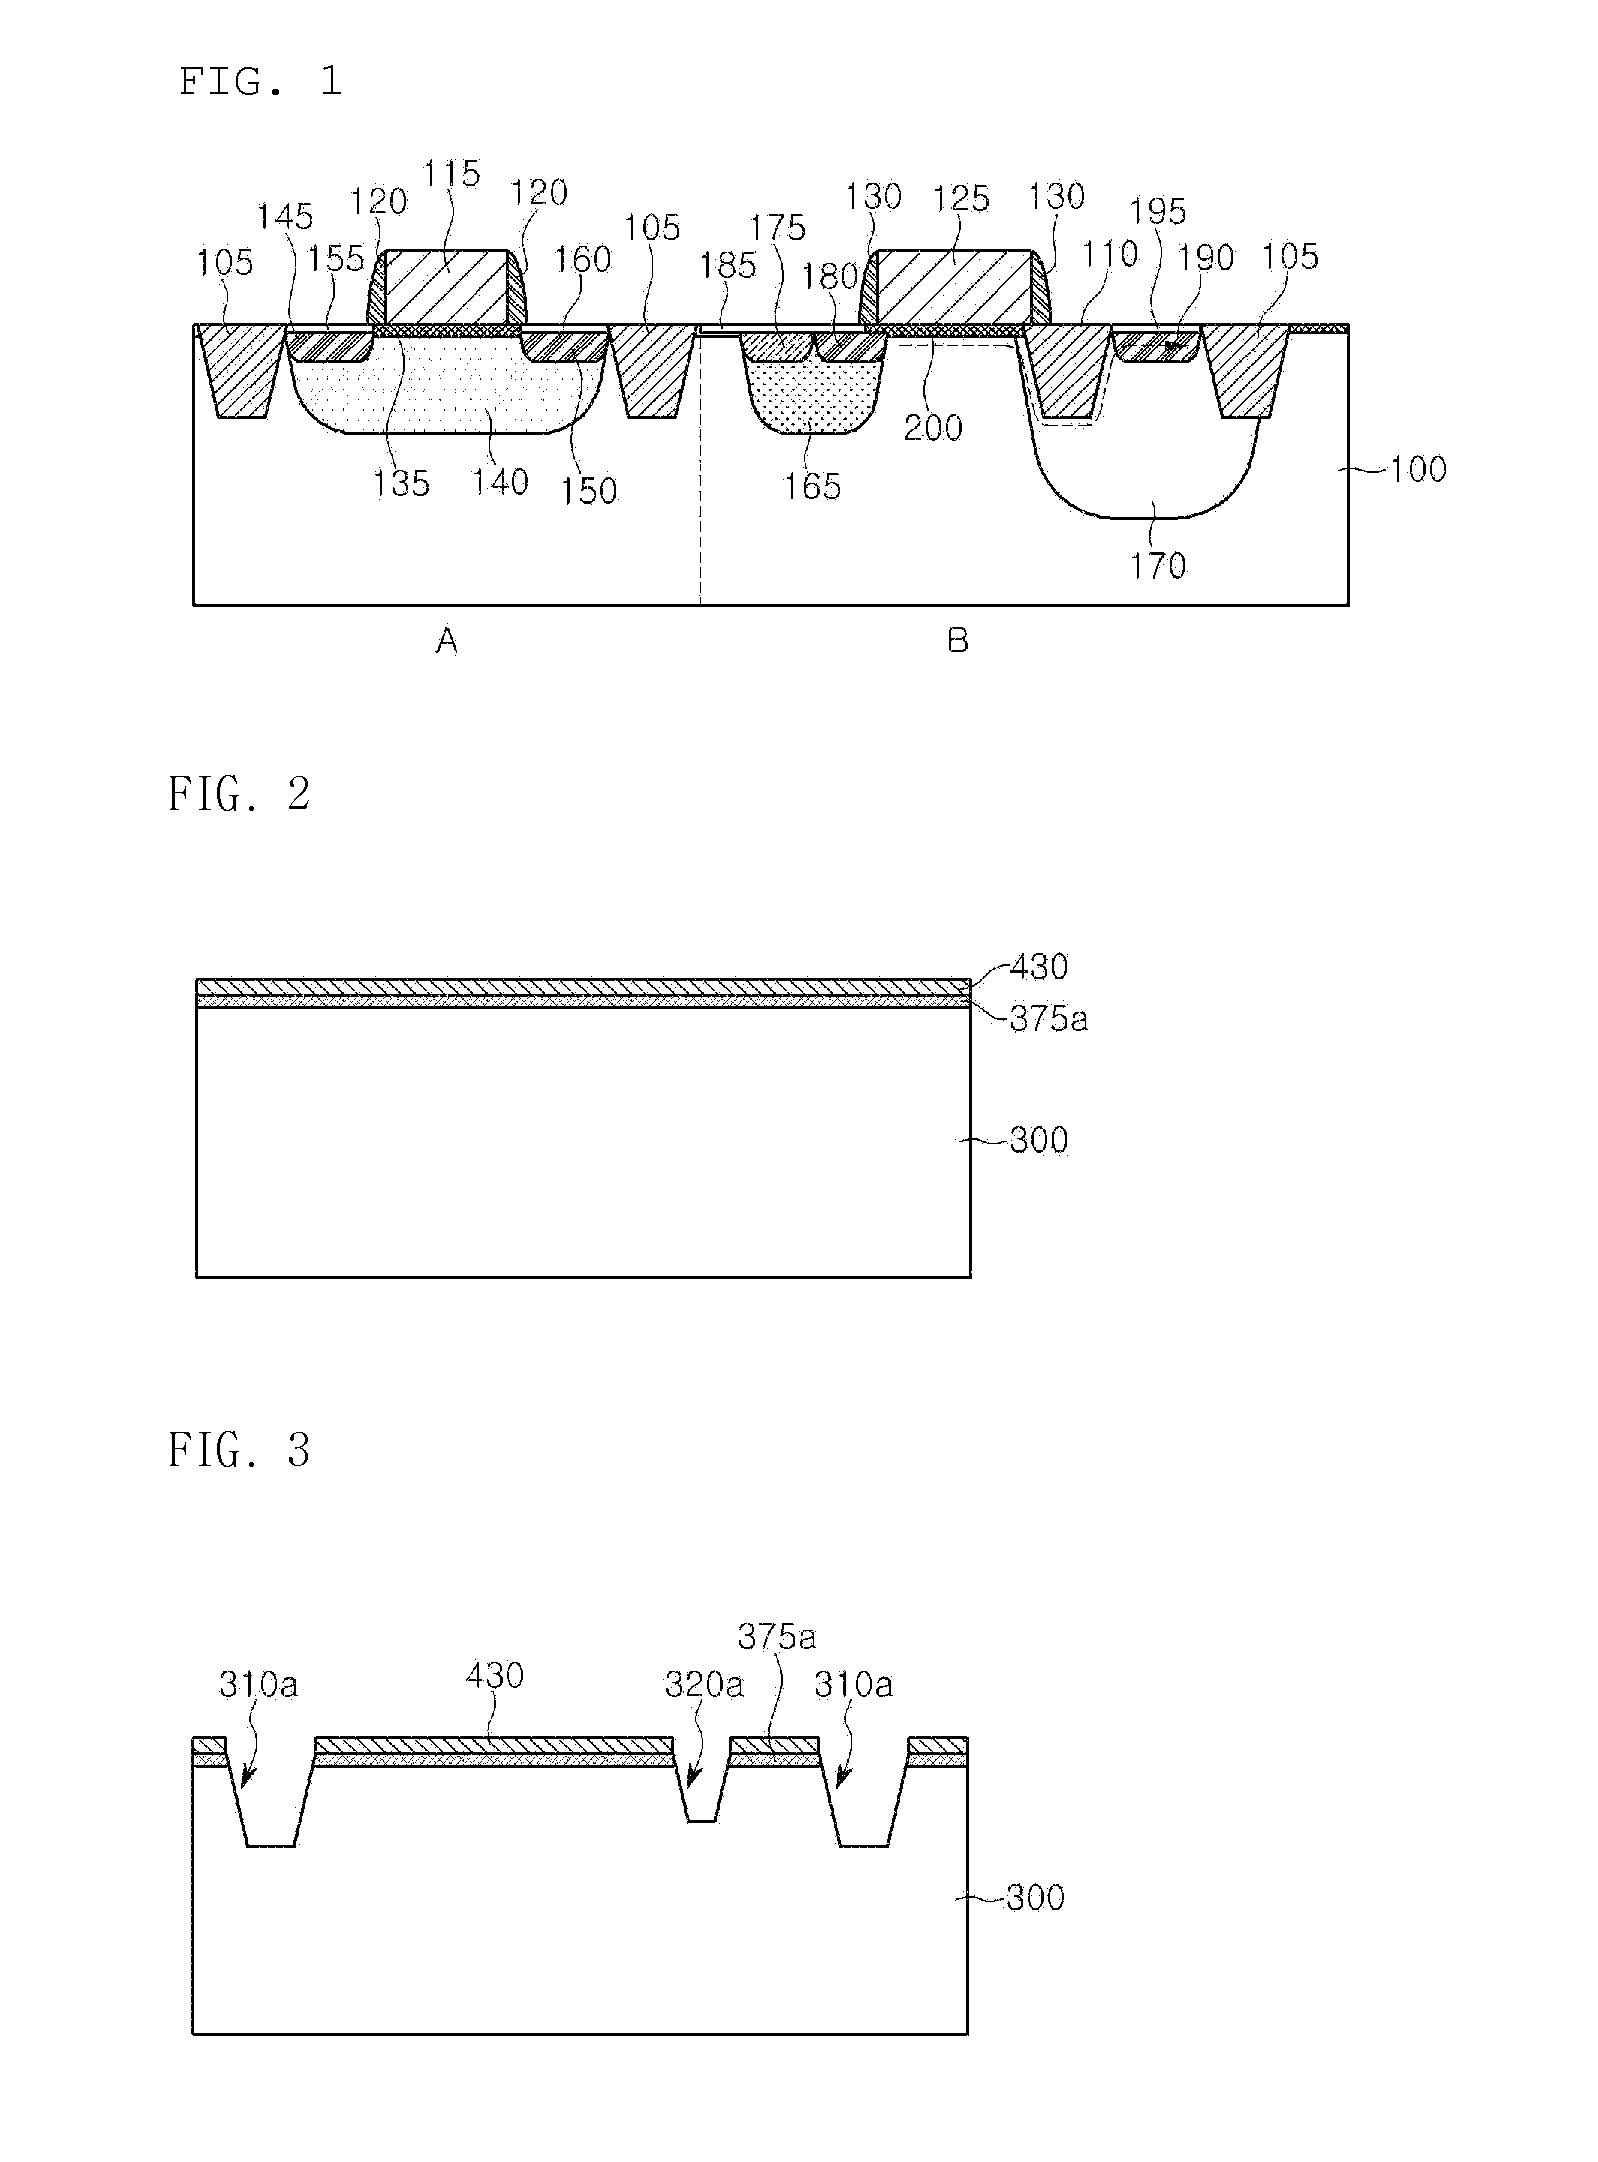 Lateral Double Diffused Metal Oxide Semiconductor (LDMOS) Device and Method of Manufacturing LDMOS Device